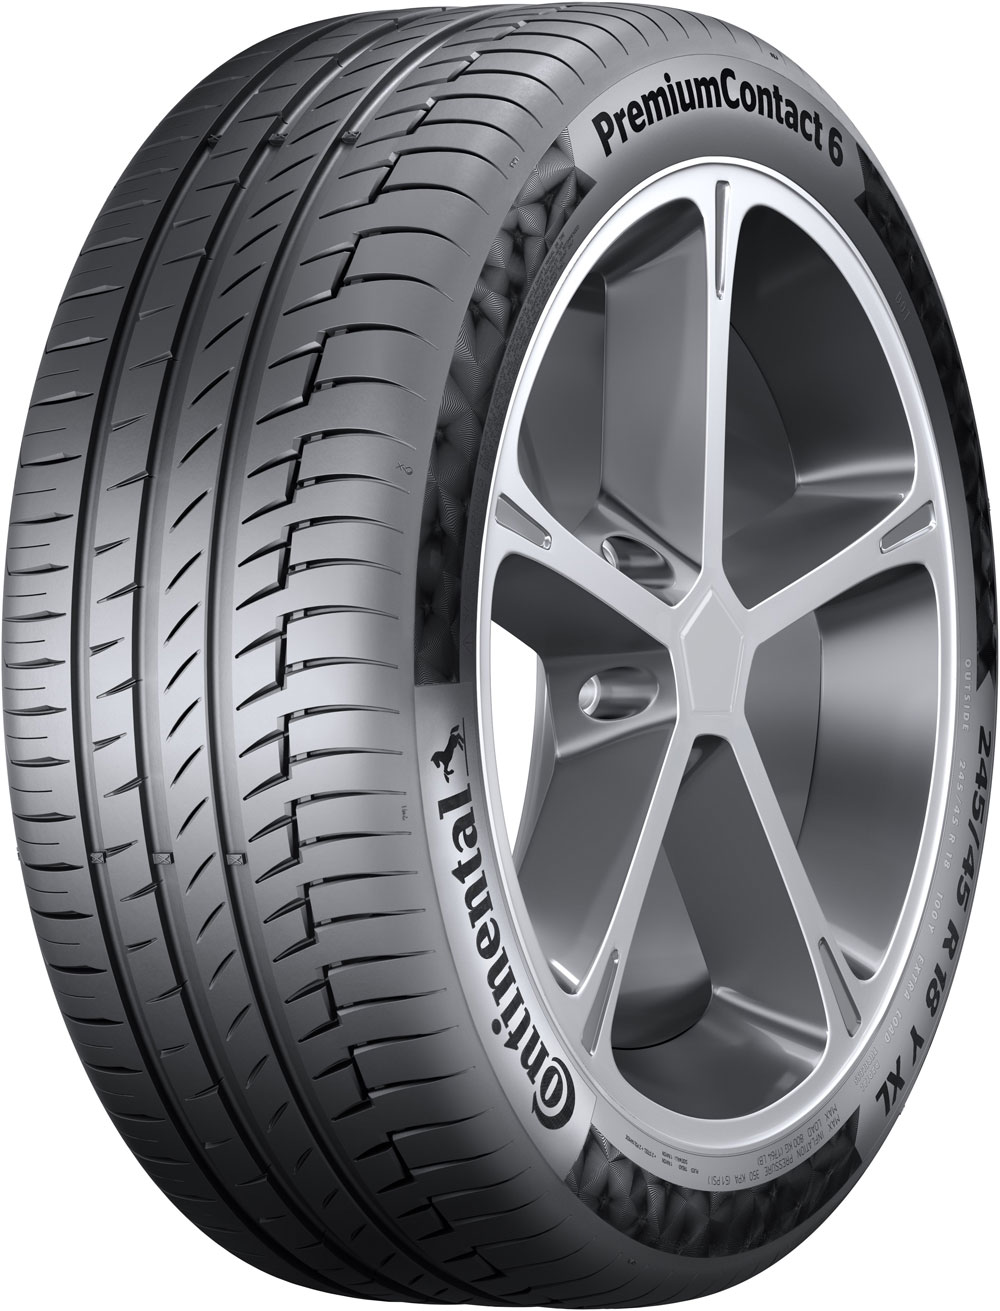 Anvelope auto CONTINENTAL PremiumContact 6 MO XL MERCEDES FP 225/45 R18 95